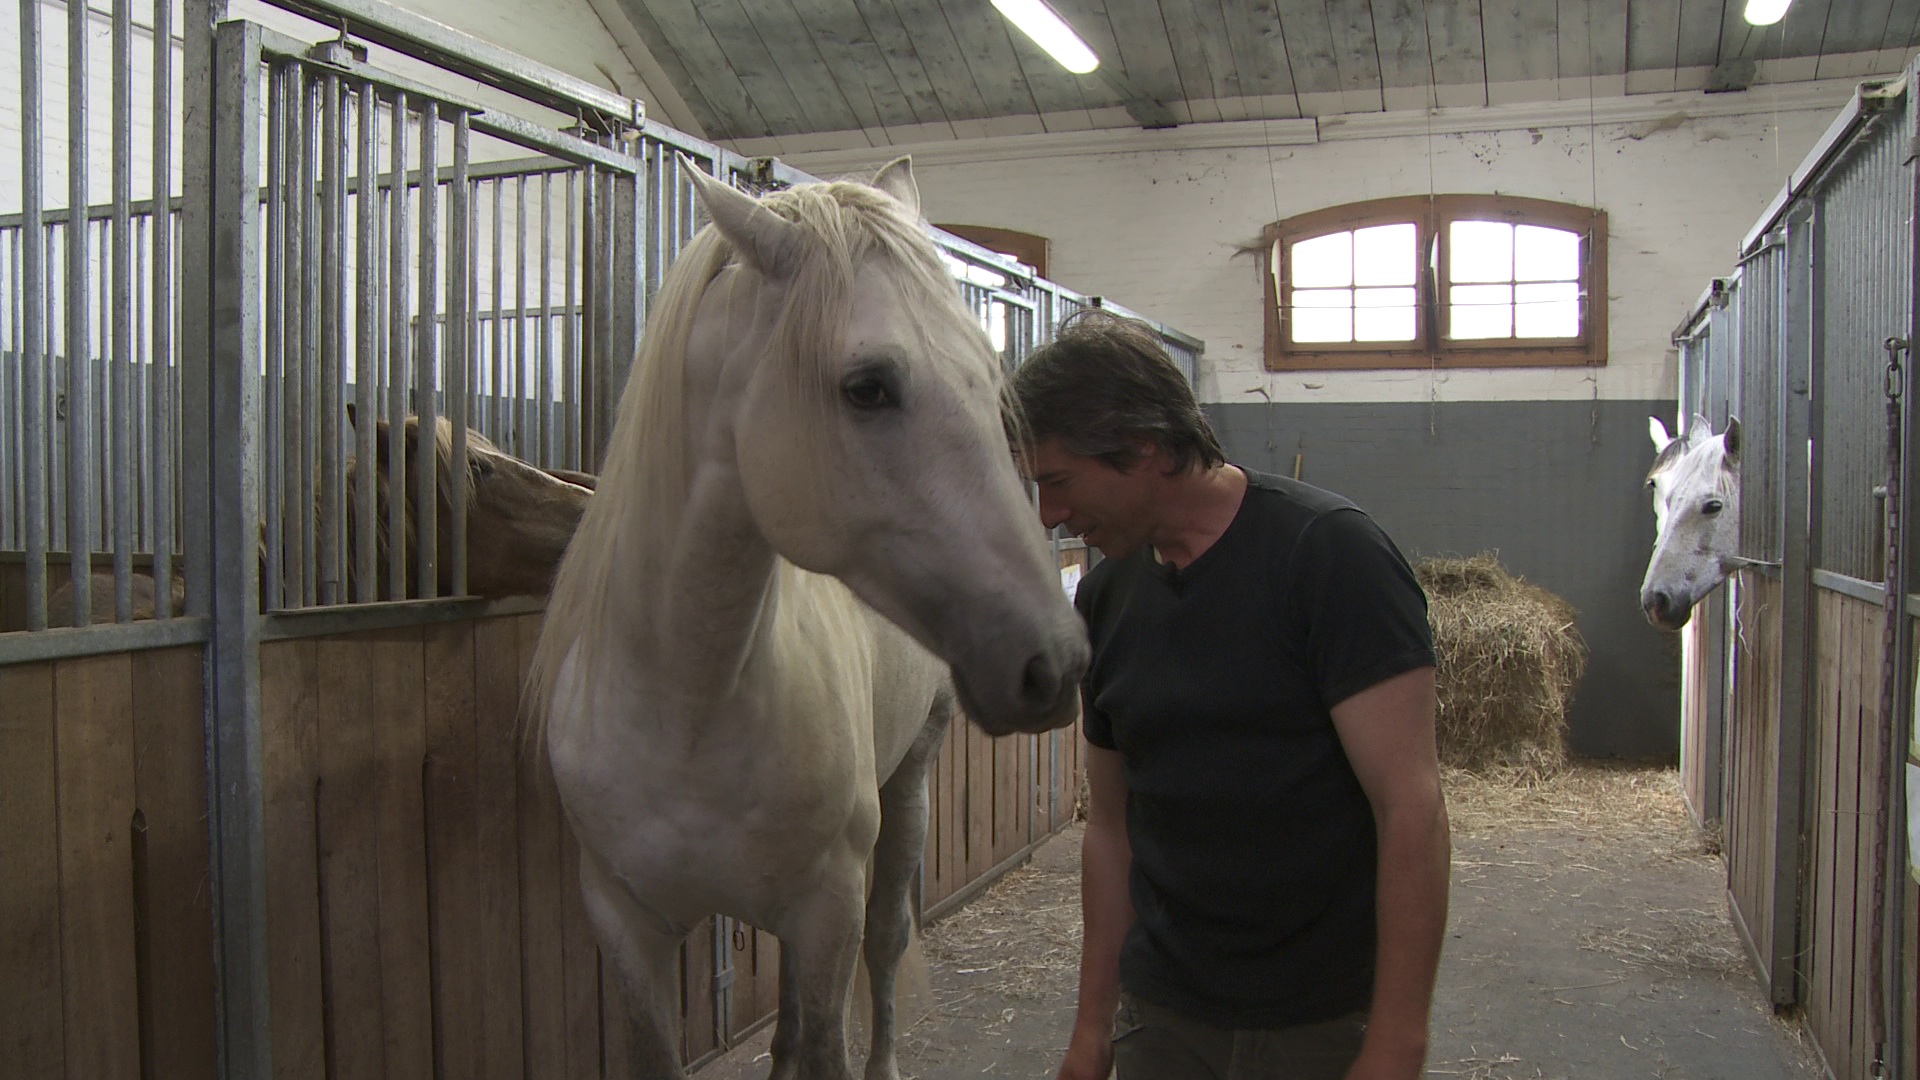 Jean-François Pignon and his Spanish stallion beeing close. The surrounding mares watching the two. Excerpt from Jolanda Ellenberger's documentary 